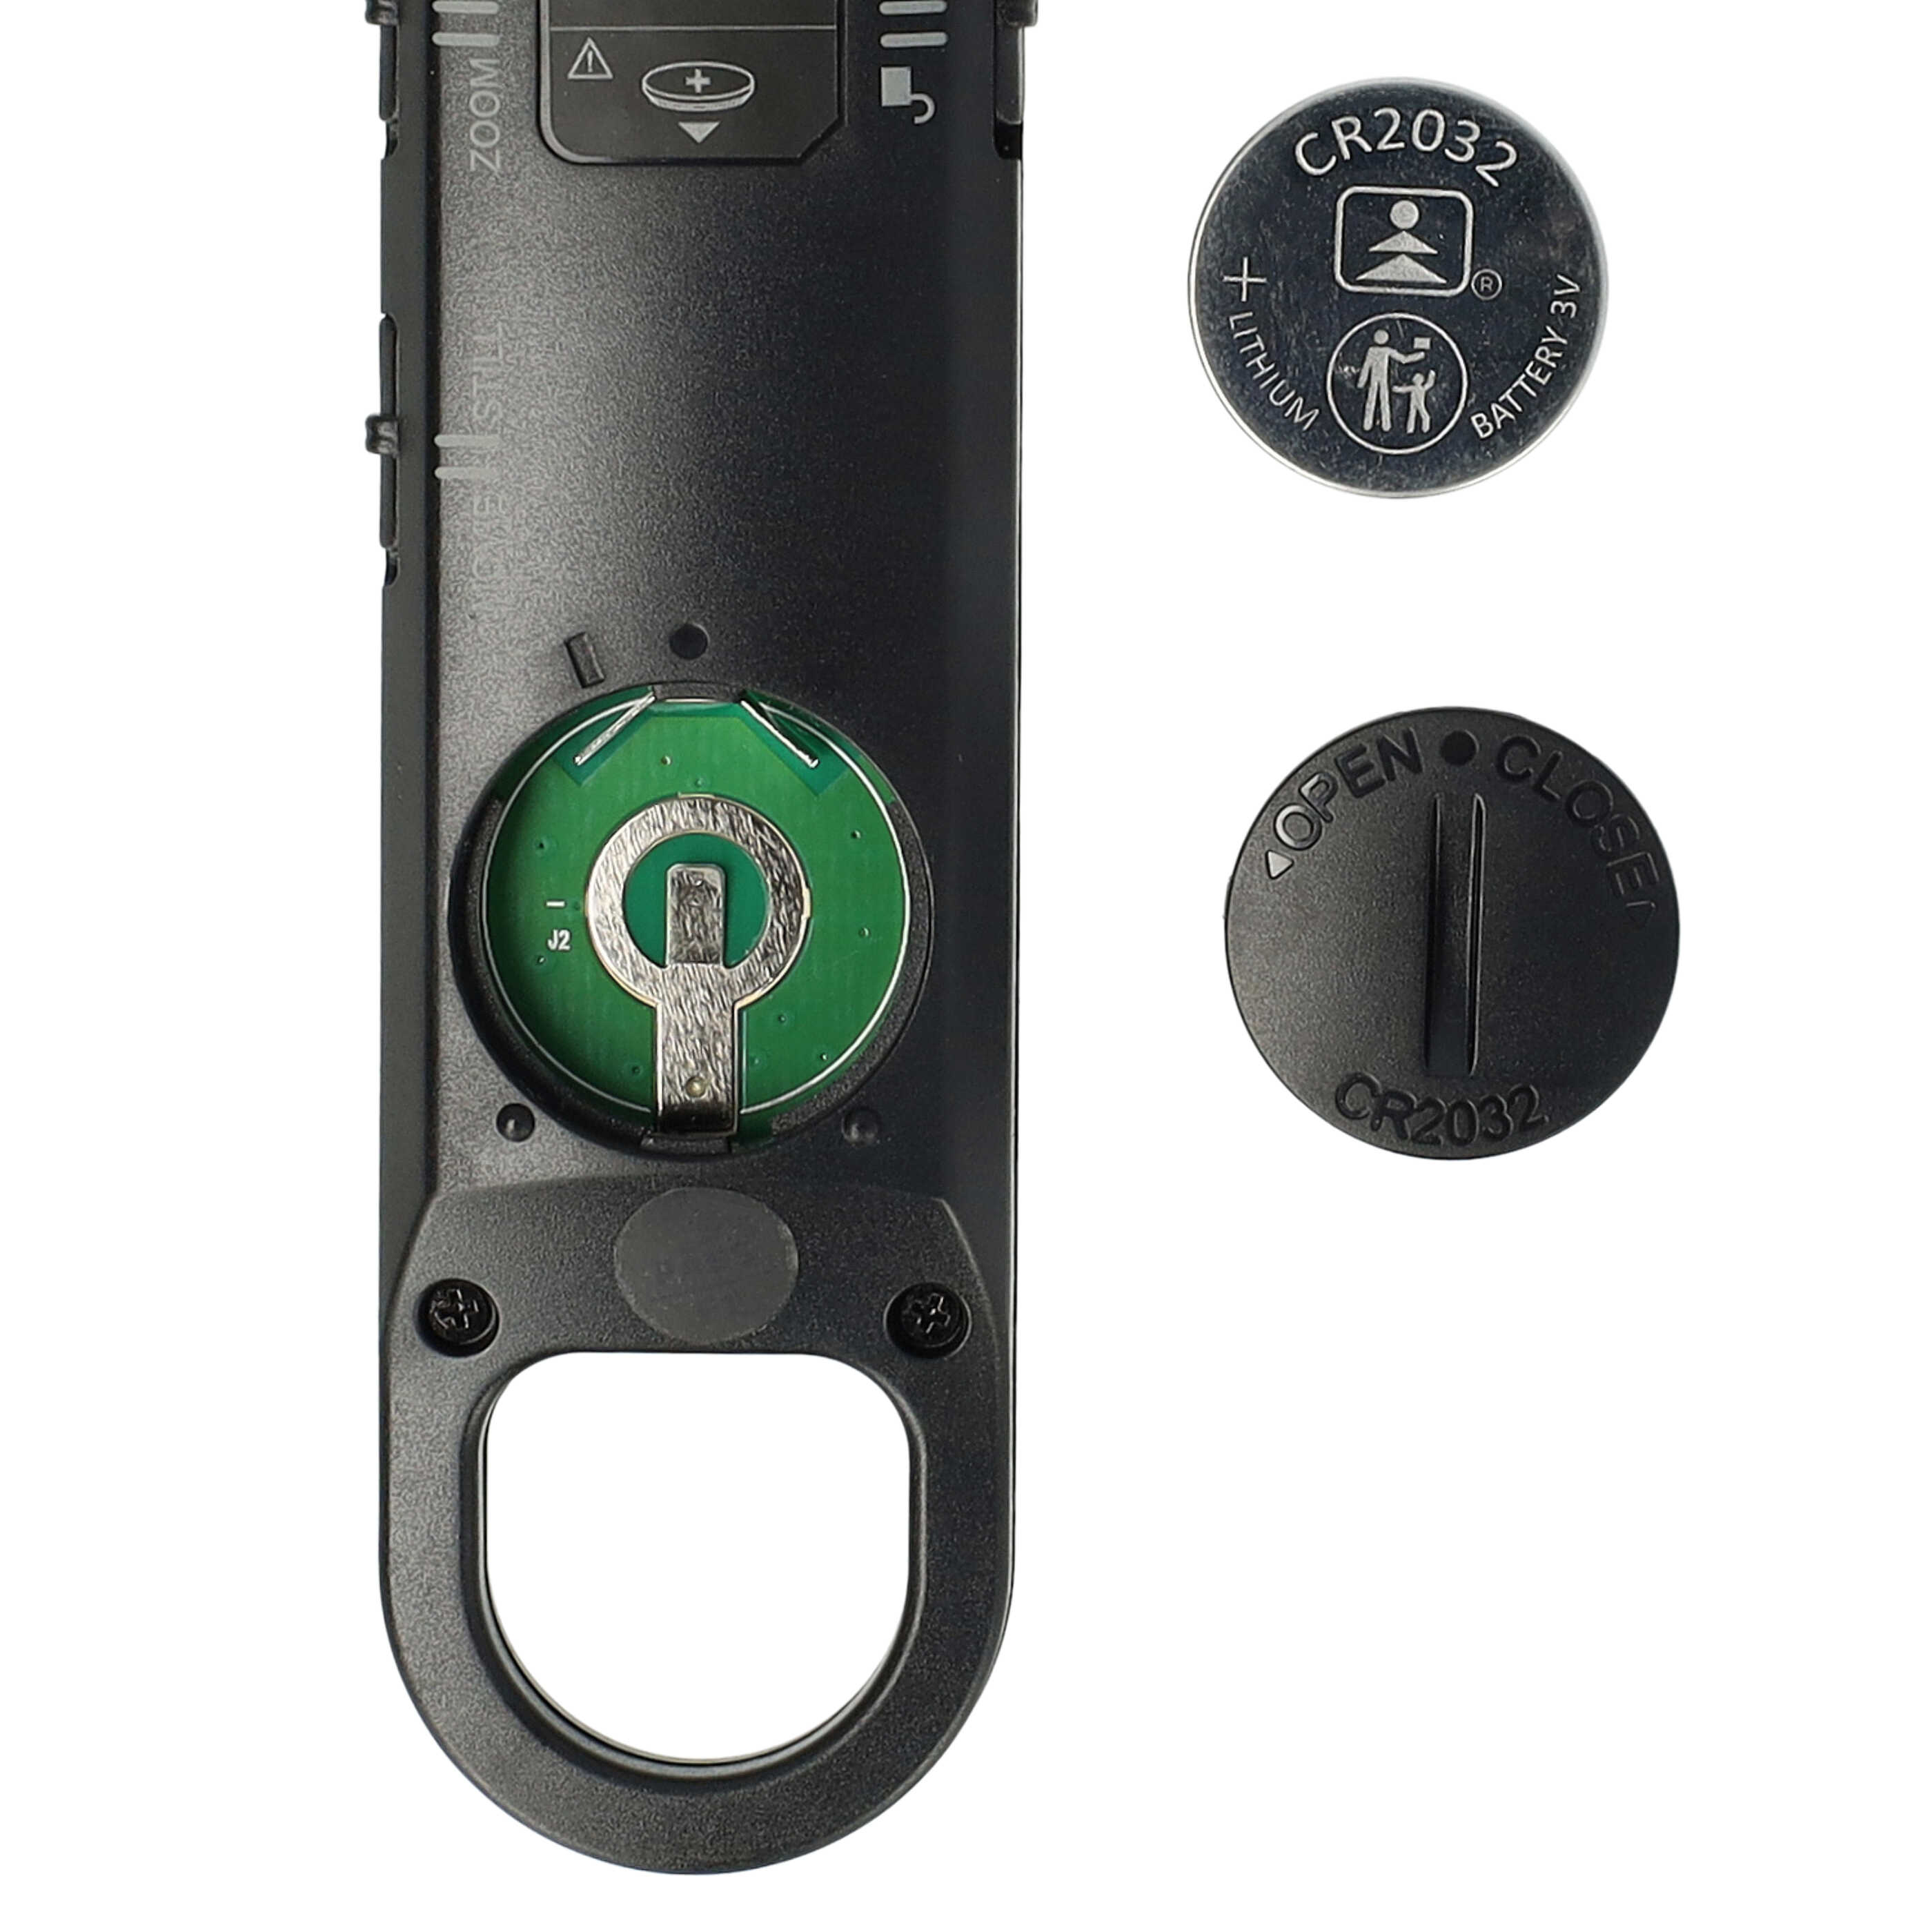 Remote Trigger as Exchange for Sony RMT-P1BT, BTR-S1 for Camera 10 m Radius + Zoom